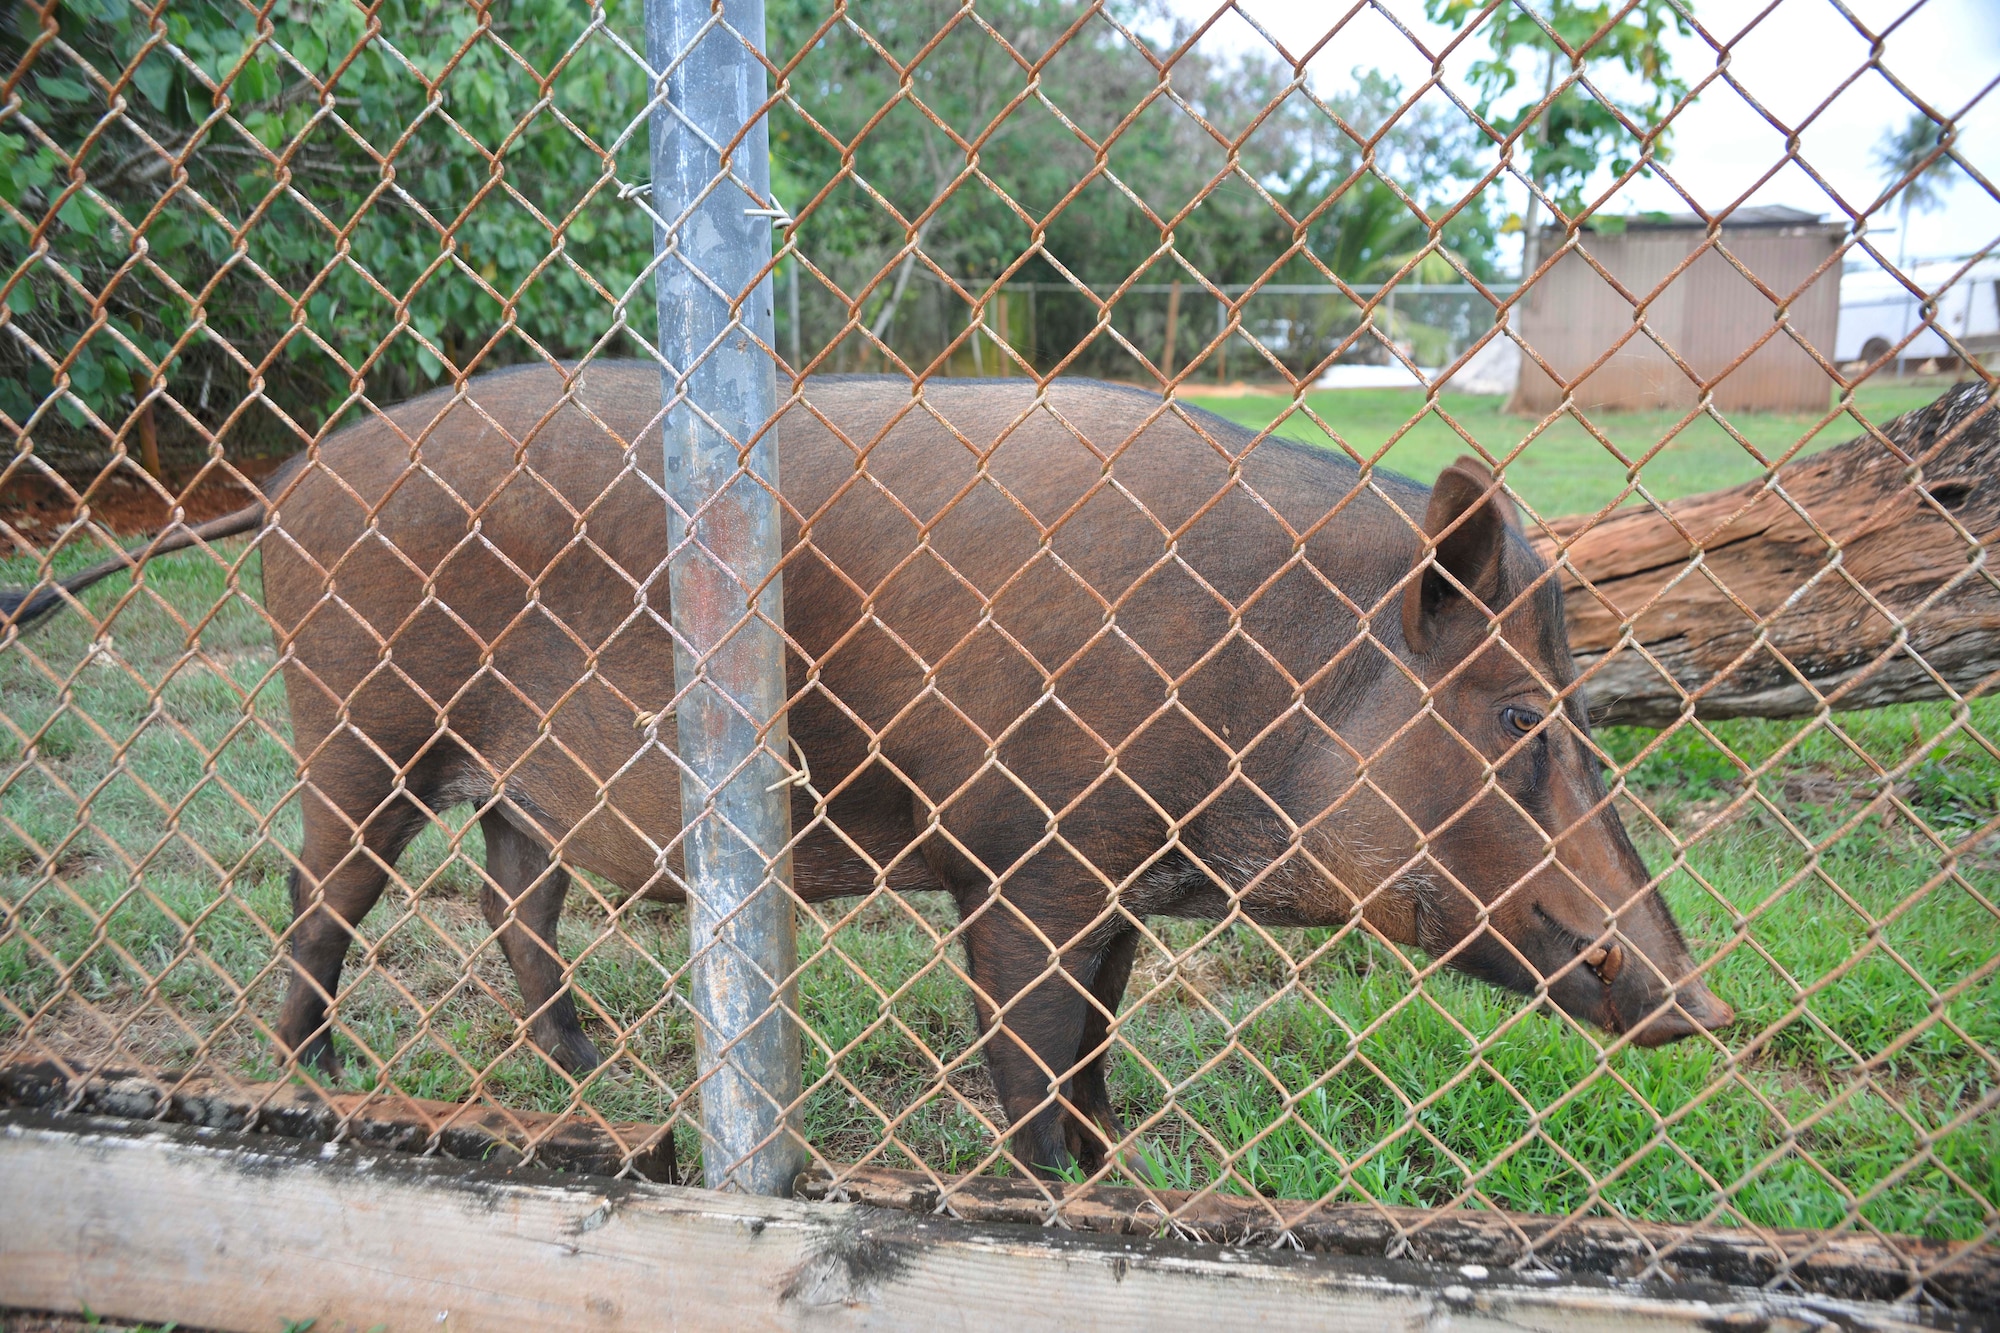 Shakey the Pig, the 36th Munitions Squadron mascot, wanders around his cage on Andersen Air Force Base, Guam, June 21, 2013.  The original mascot of the 36th MUNS was found in 1957 when a couple of Airmen caught him as a piglet. The current Shakey has been the mascot for three years. (U.S. Air Force photo by Senior Airman Robert Hicks/Released)